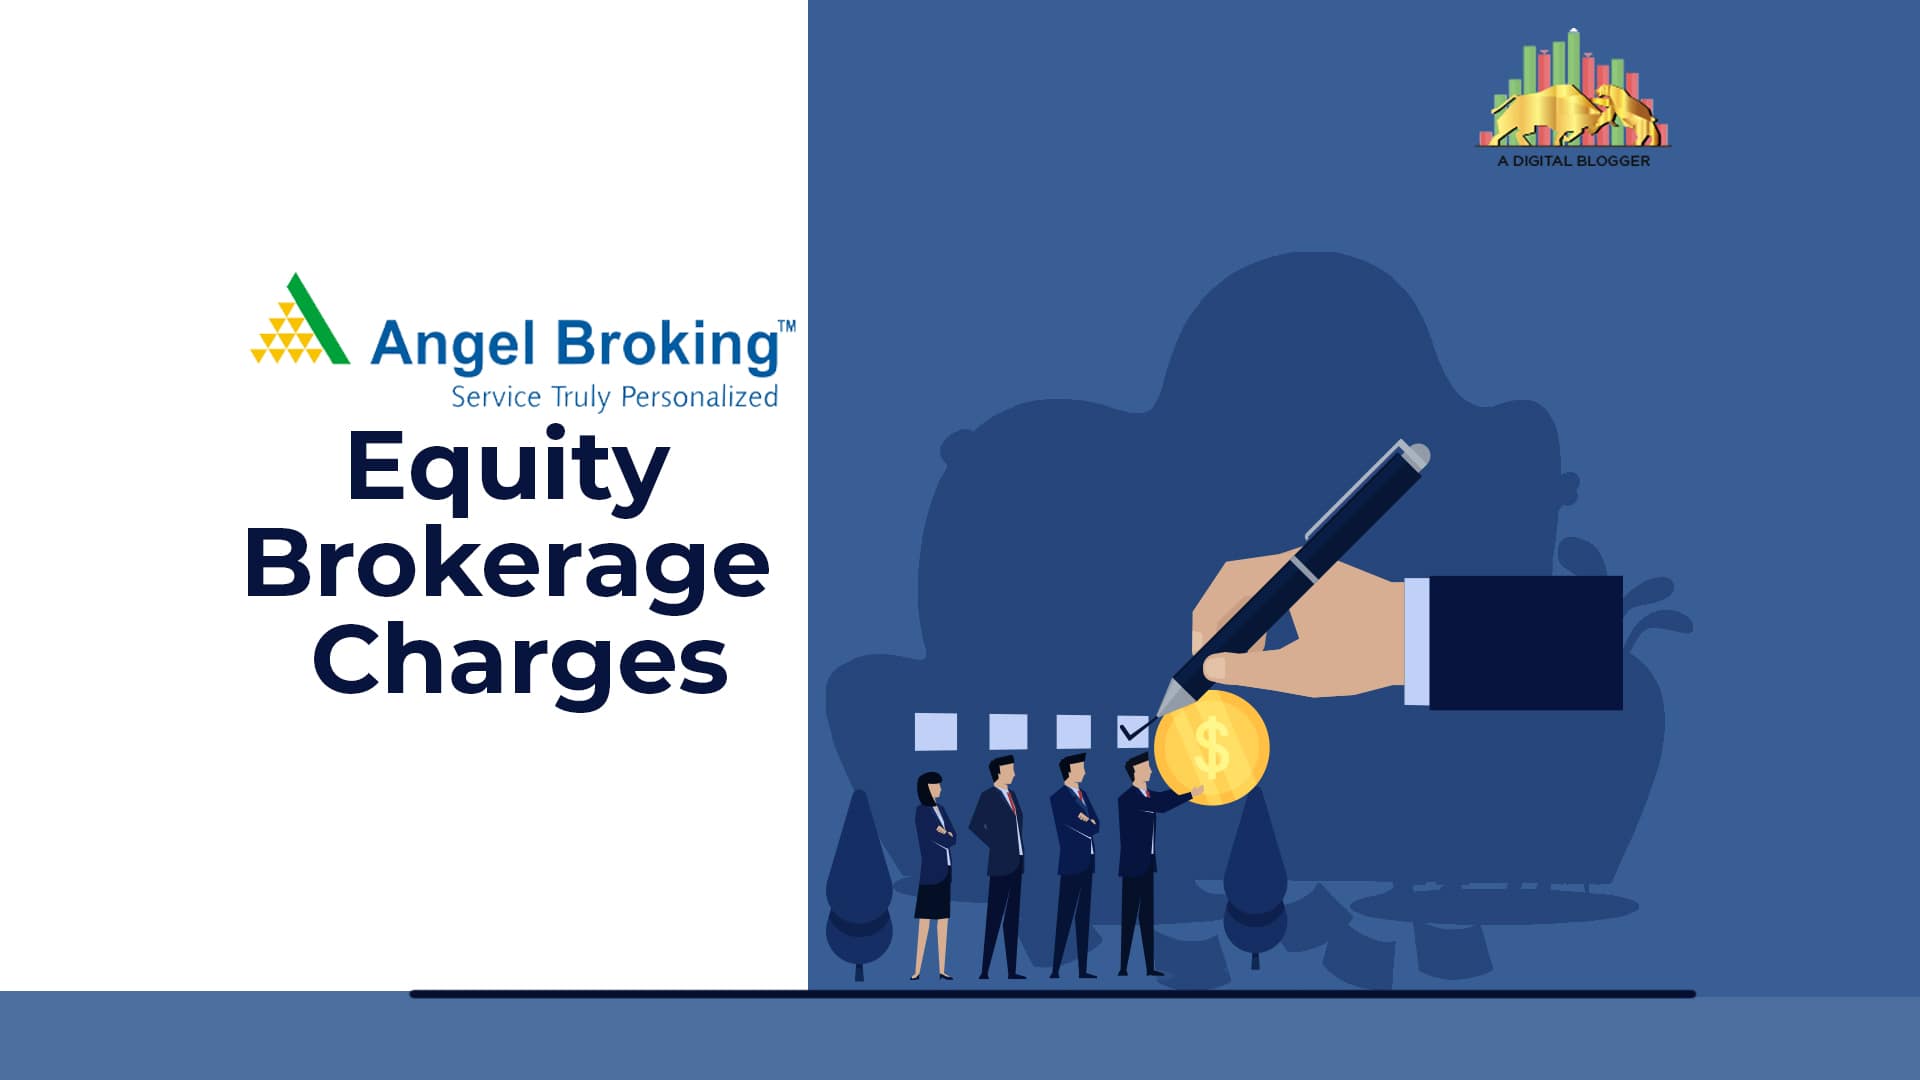 What Is Angel Broking Equity Brokerage Charges?